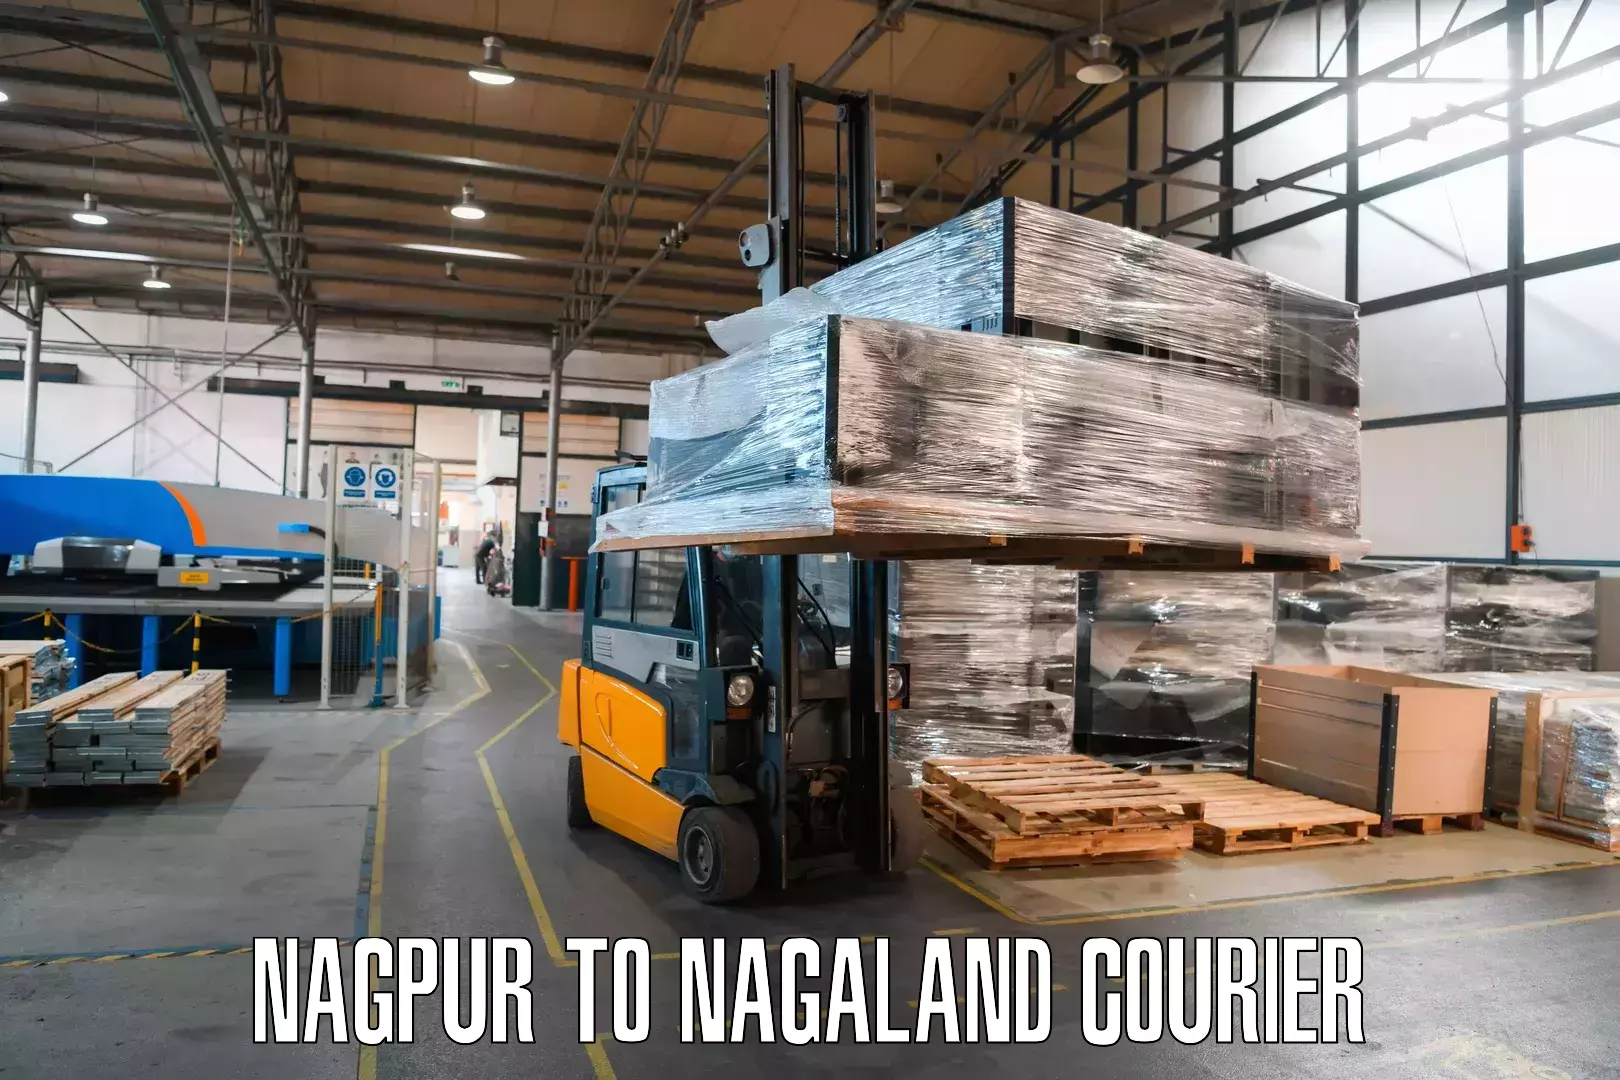 High-priority parcel service Nagpur to Nagaland